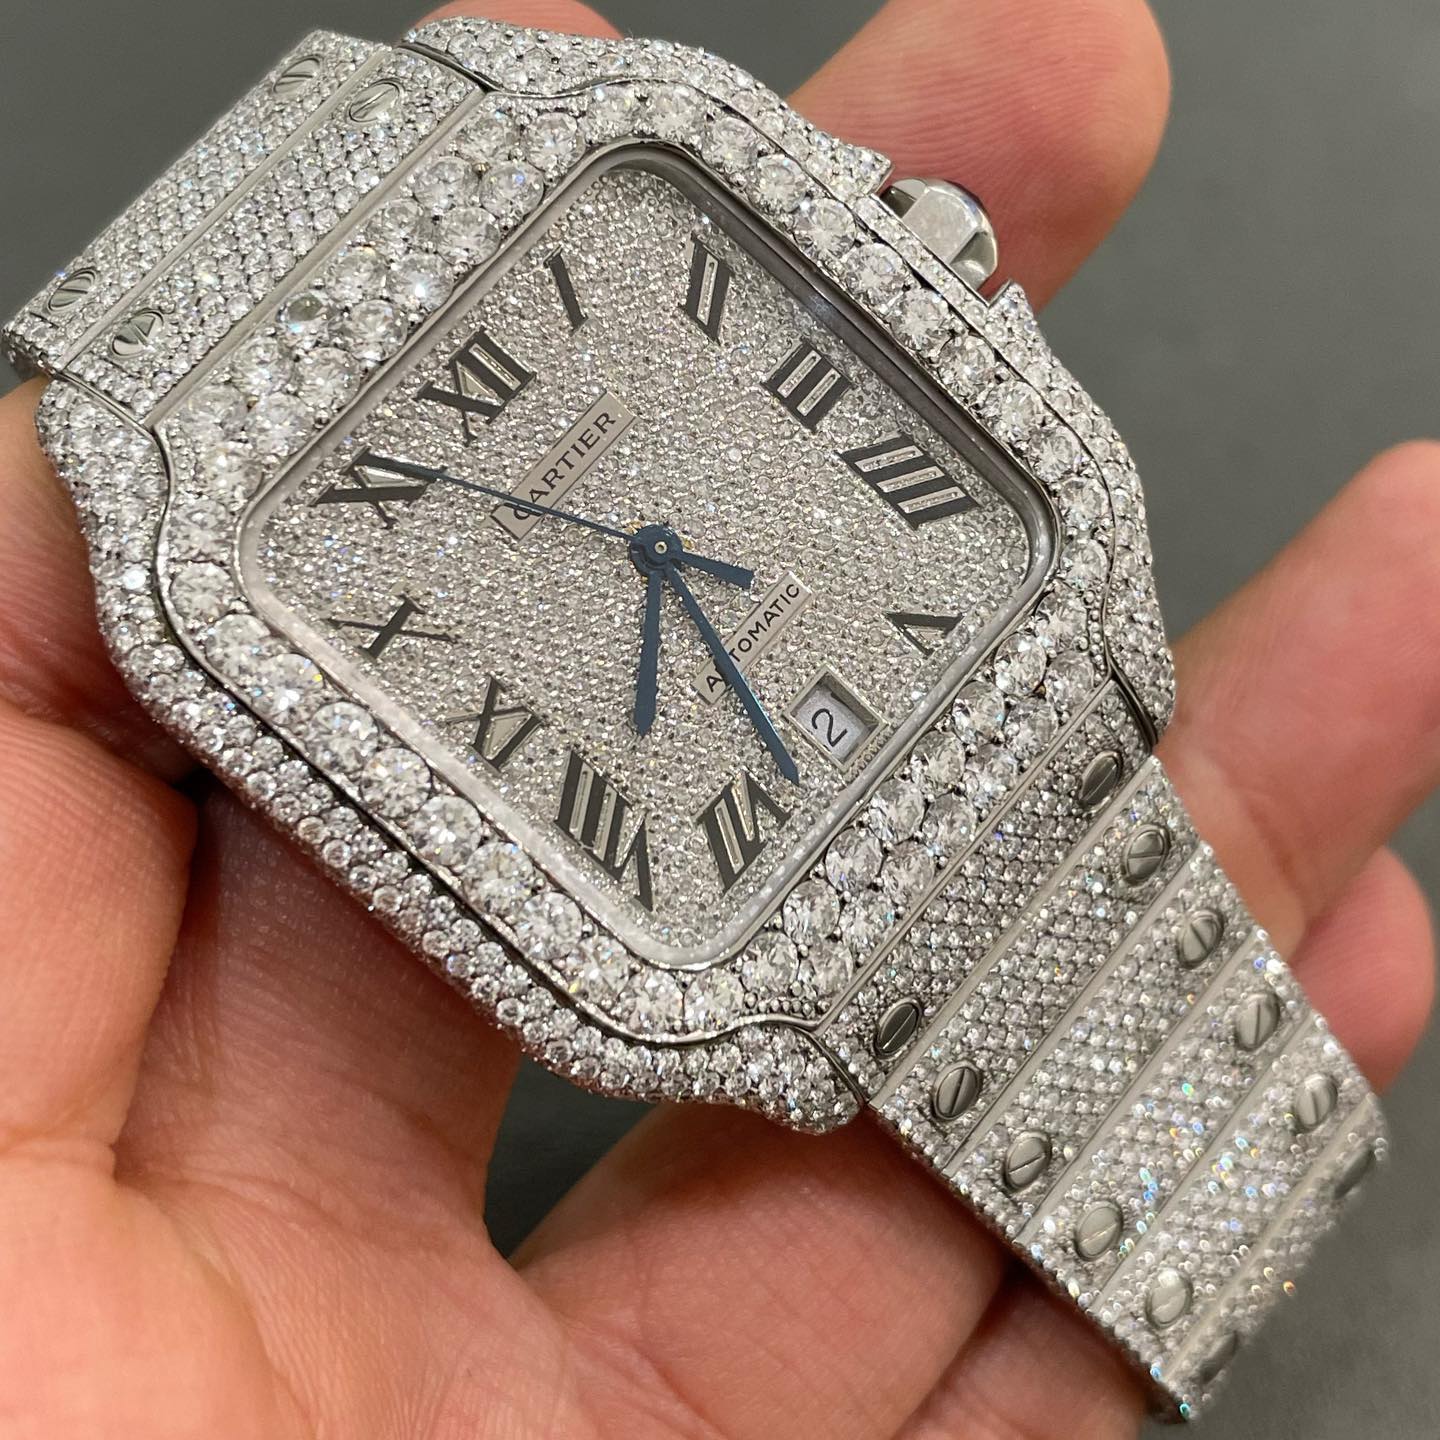 moissanite cartier watch, iced out cartier, bustdown cartier, moissanite diamond watch